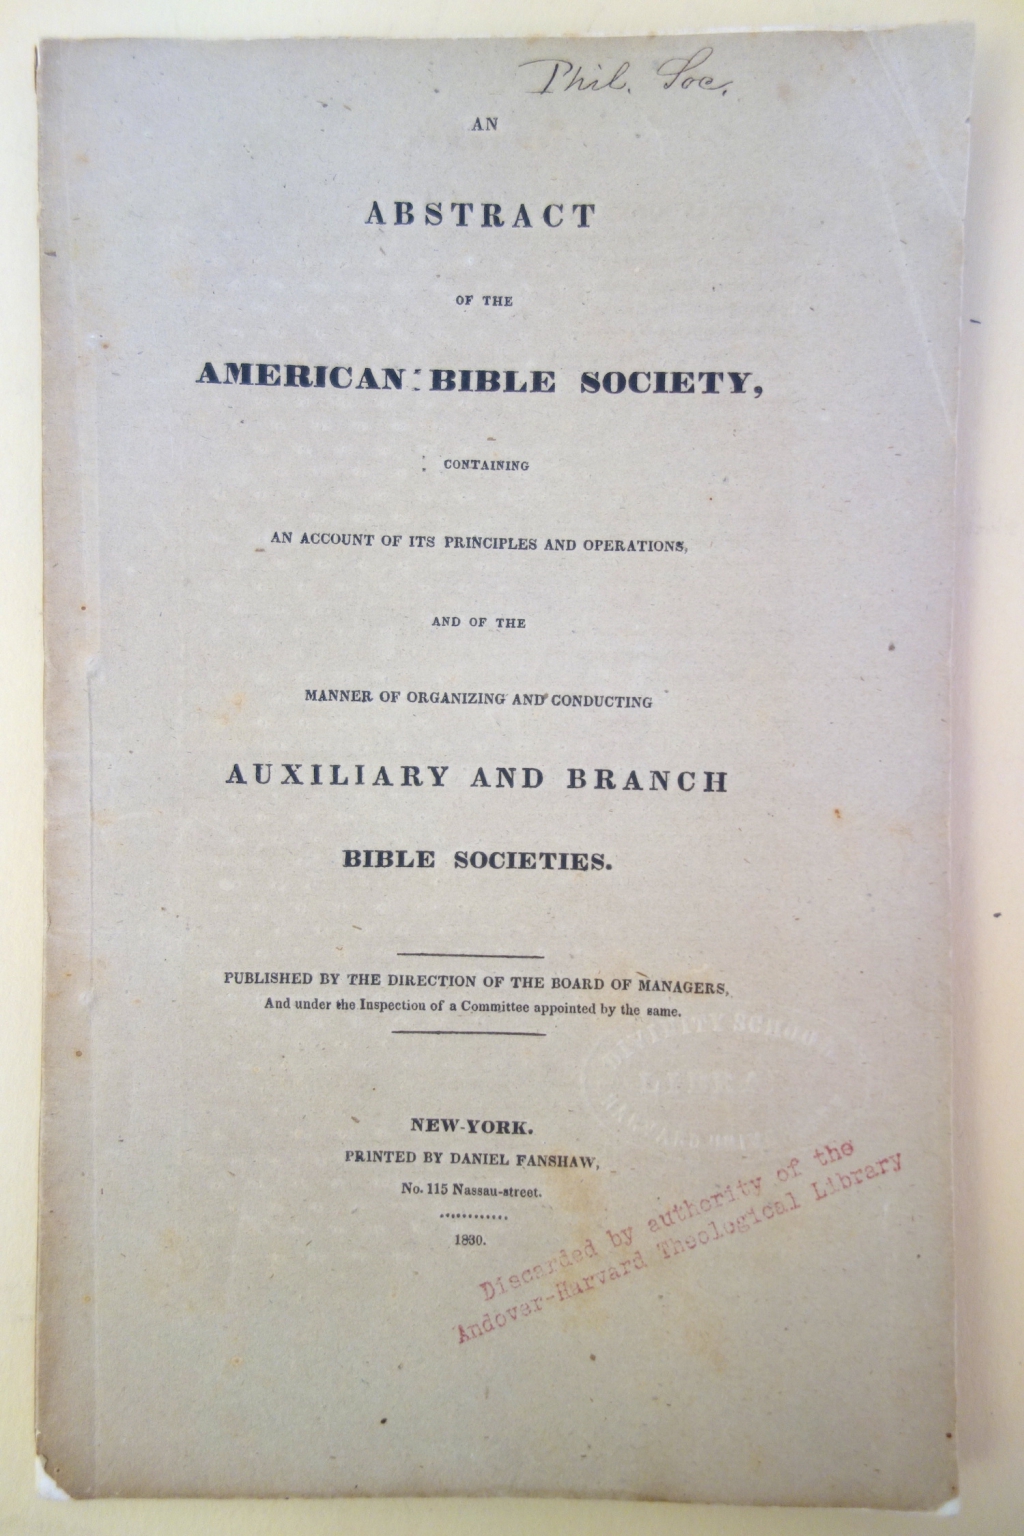 Abstract of the American Bible Society